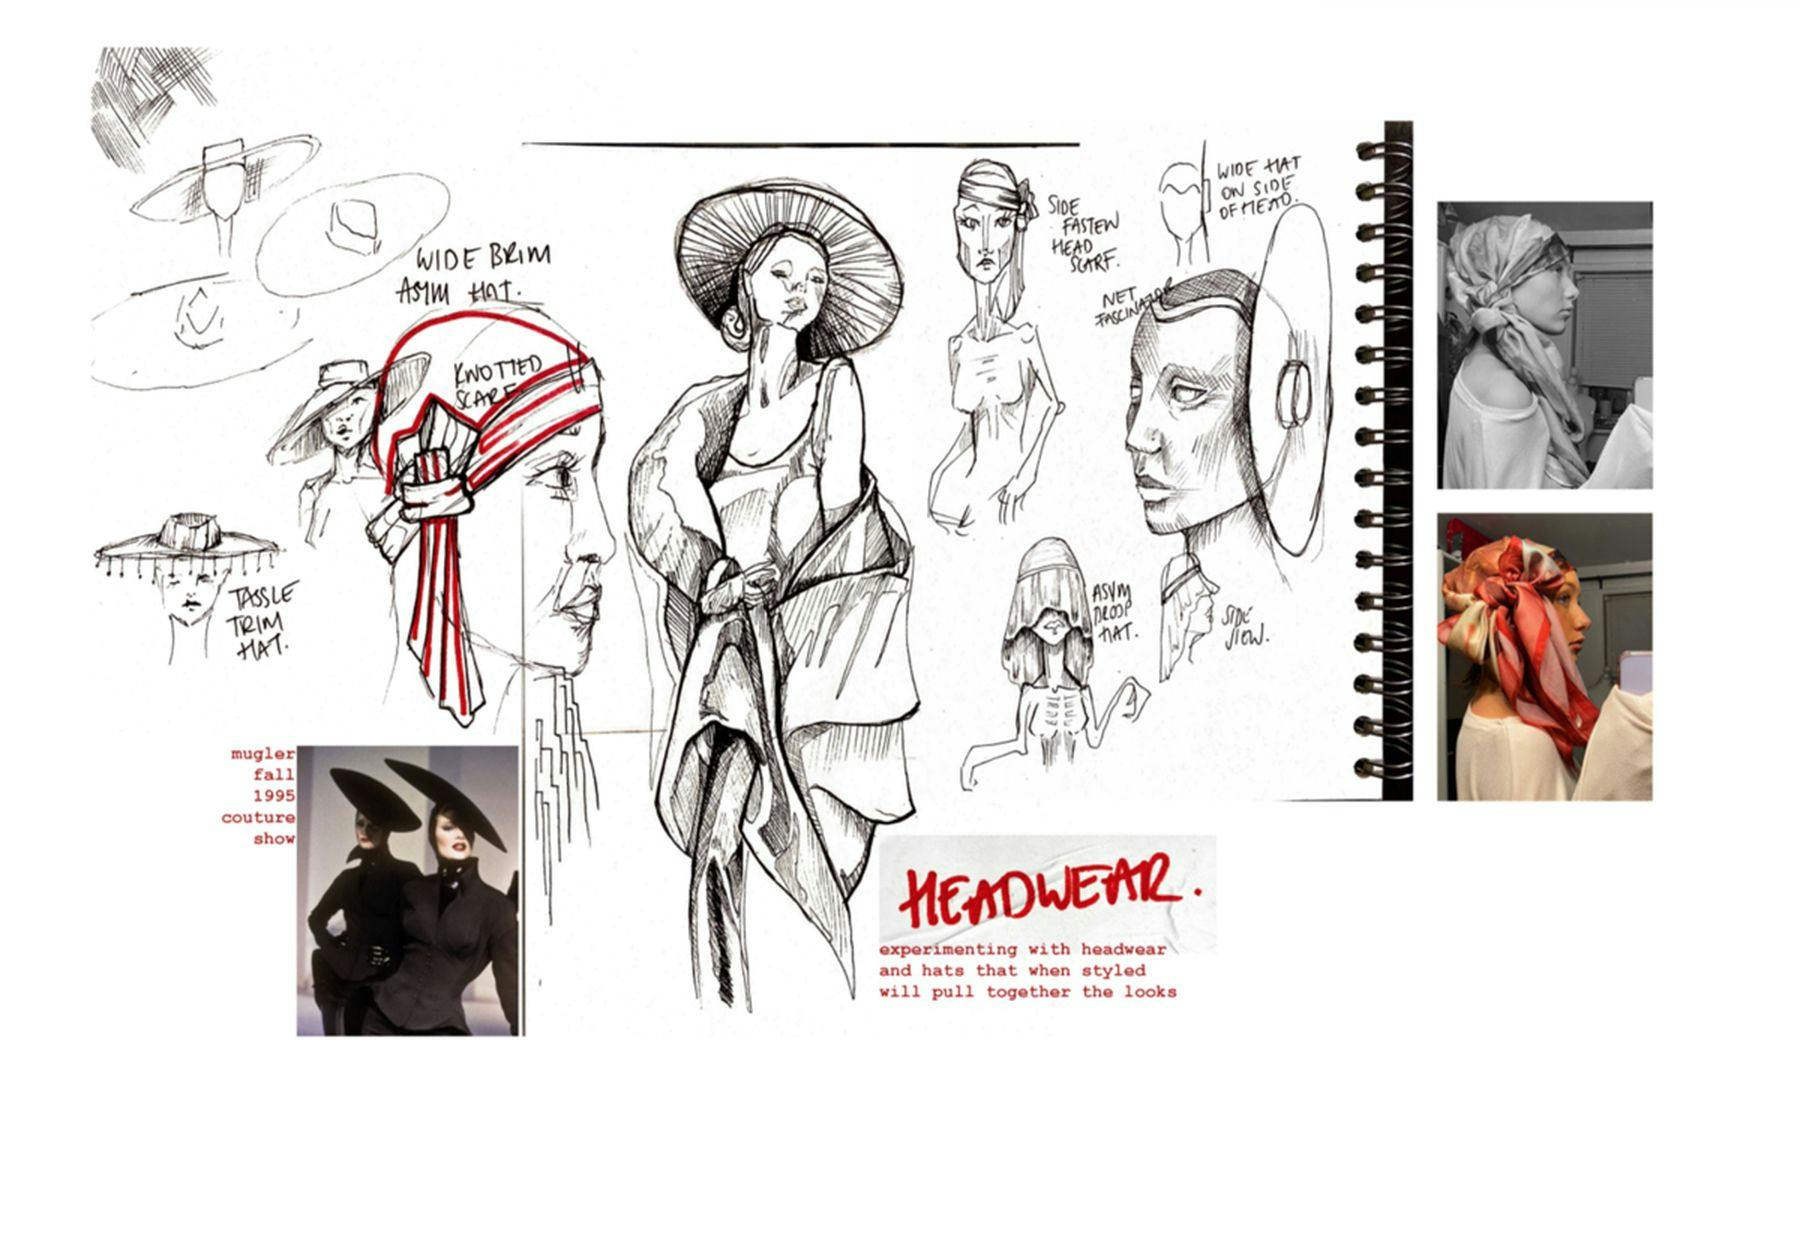 A series of sketches and photographs with the title and definition Headwear: experimenting with headwear and hats that when styled will pull together the looks. Hat sketches are titled wide brim asym hat, tassle trim hat, side fasten head scarf and wide hat on side of head.